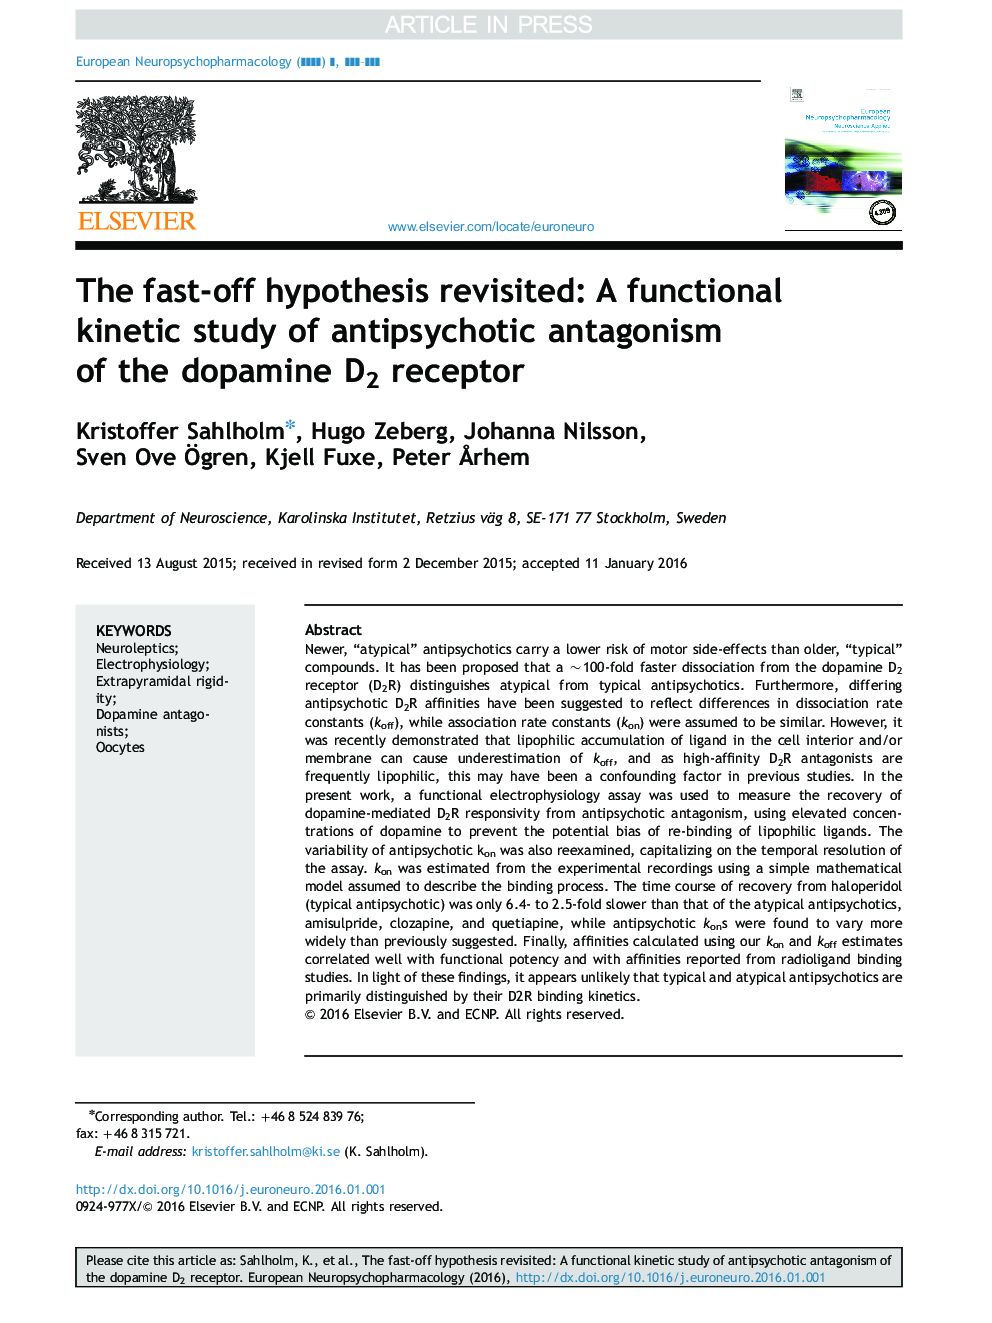 The fast-off hypothesis revisited: A functional kinetic study of antipsychotic antagonism of the dopamine D2 receptor